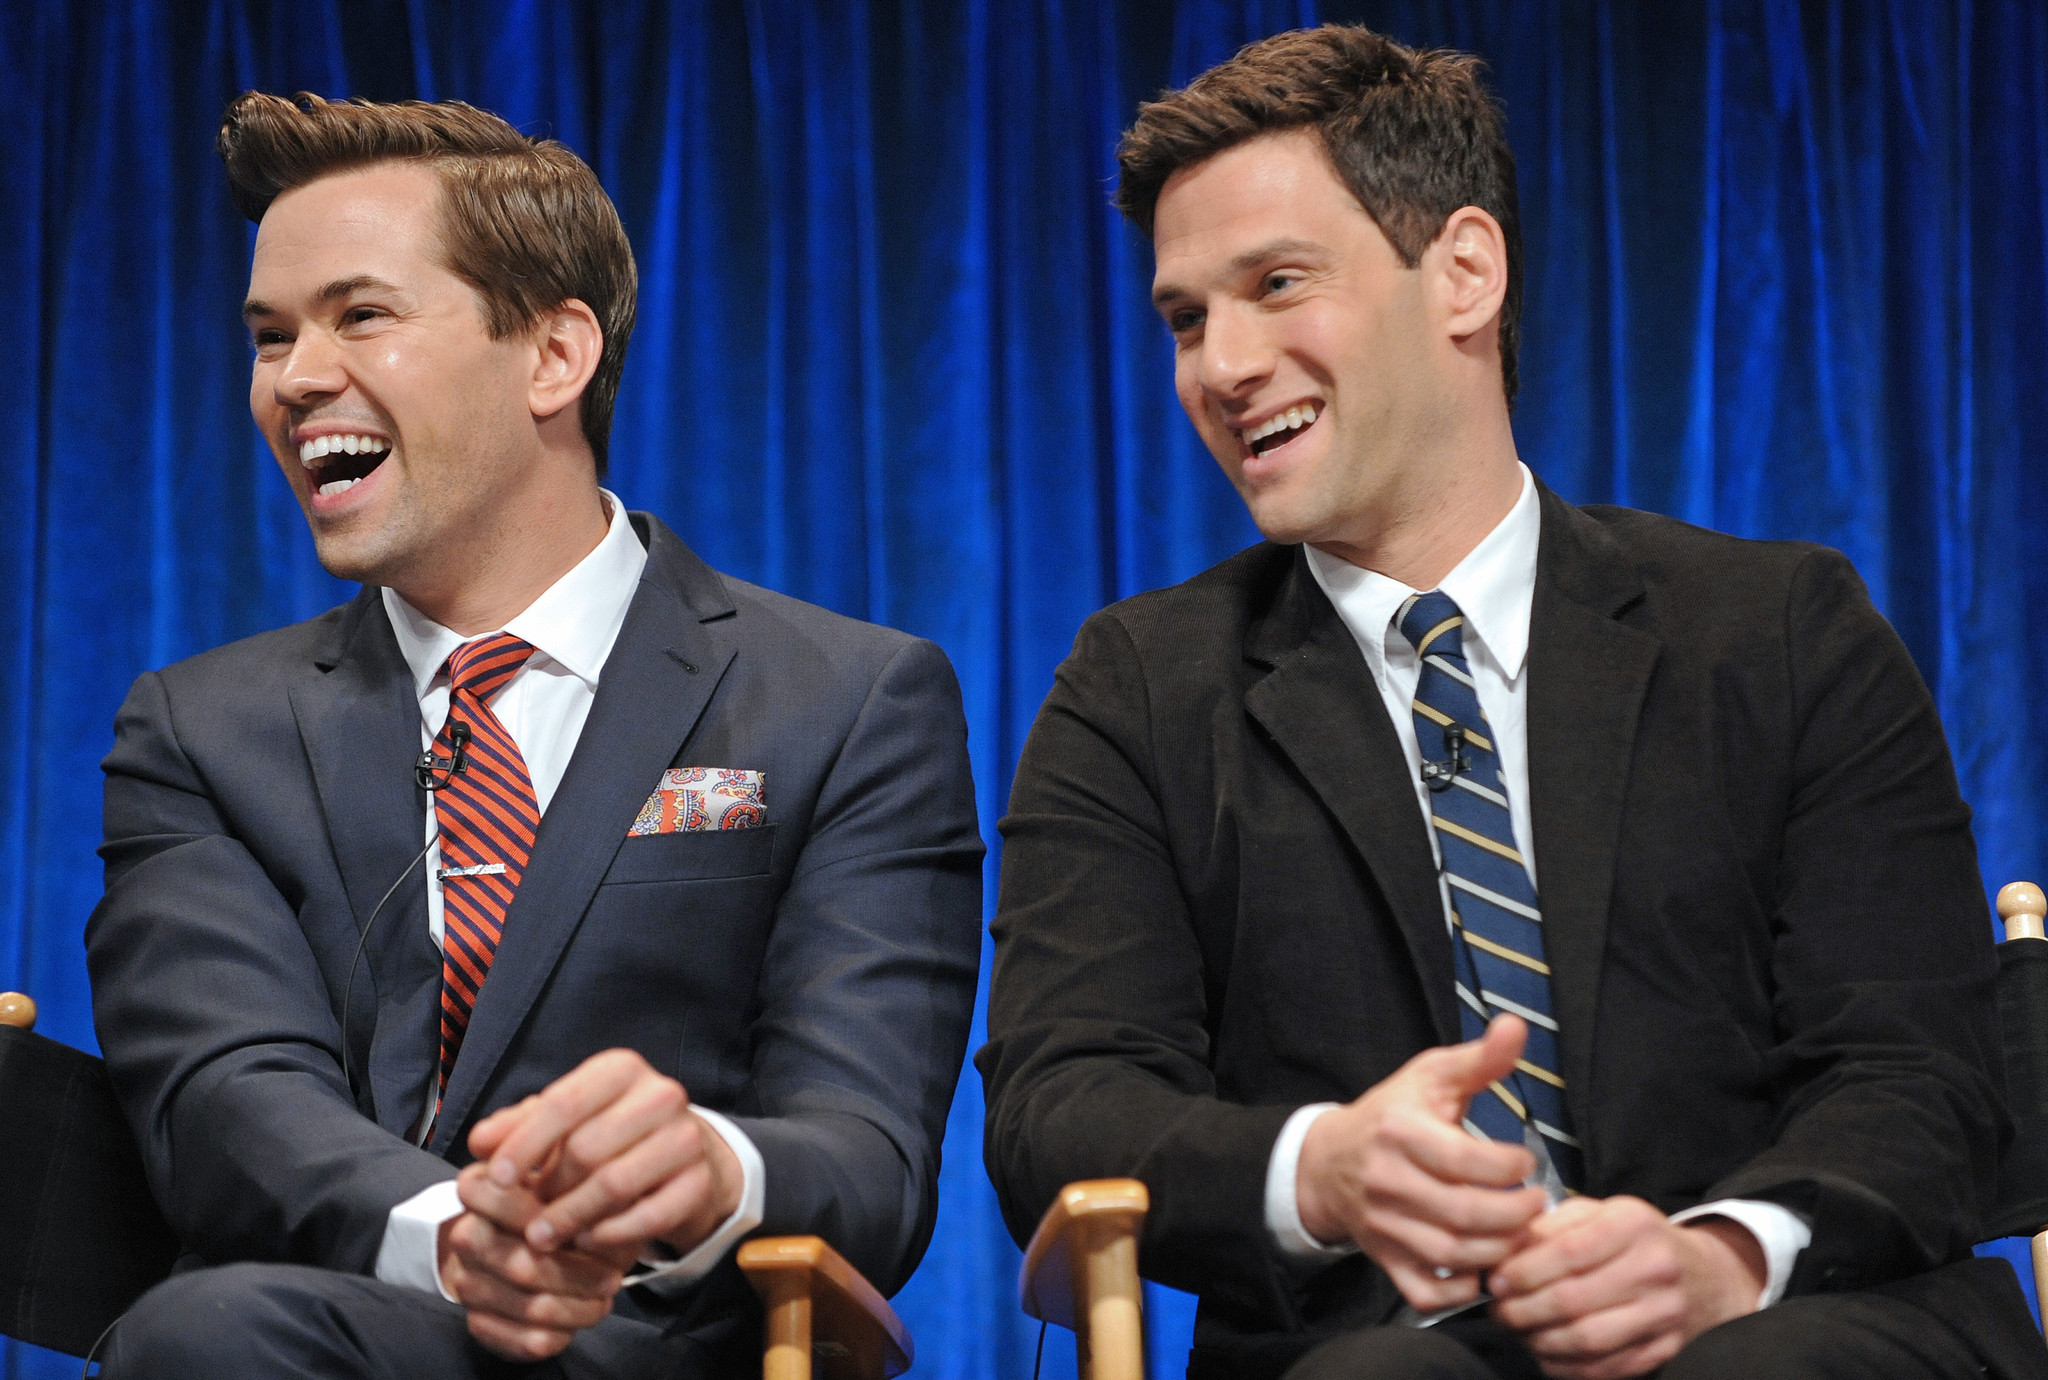 Justin Bartha and Andrew Rannells at event of Nauja norma (2012)